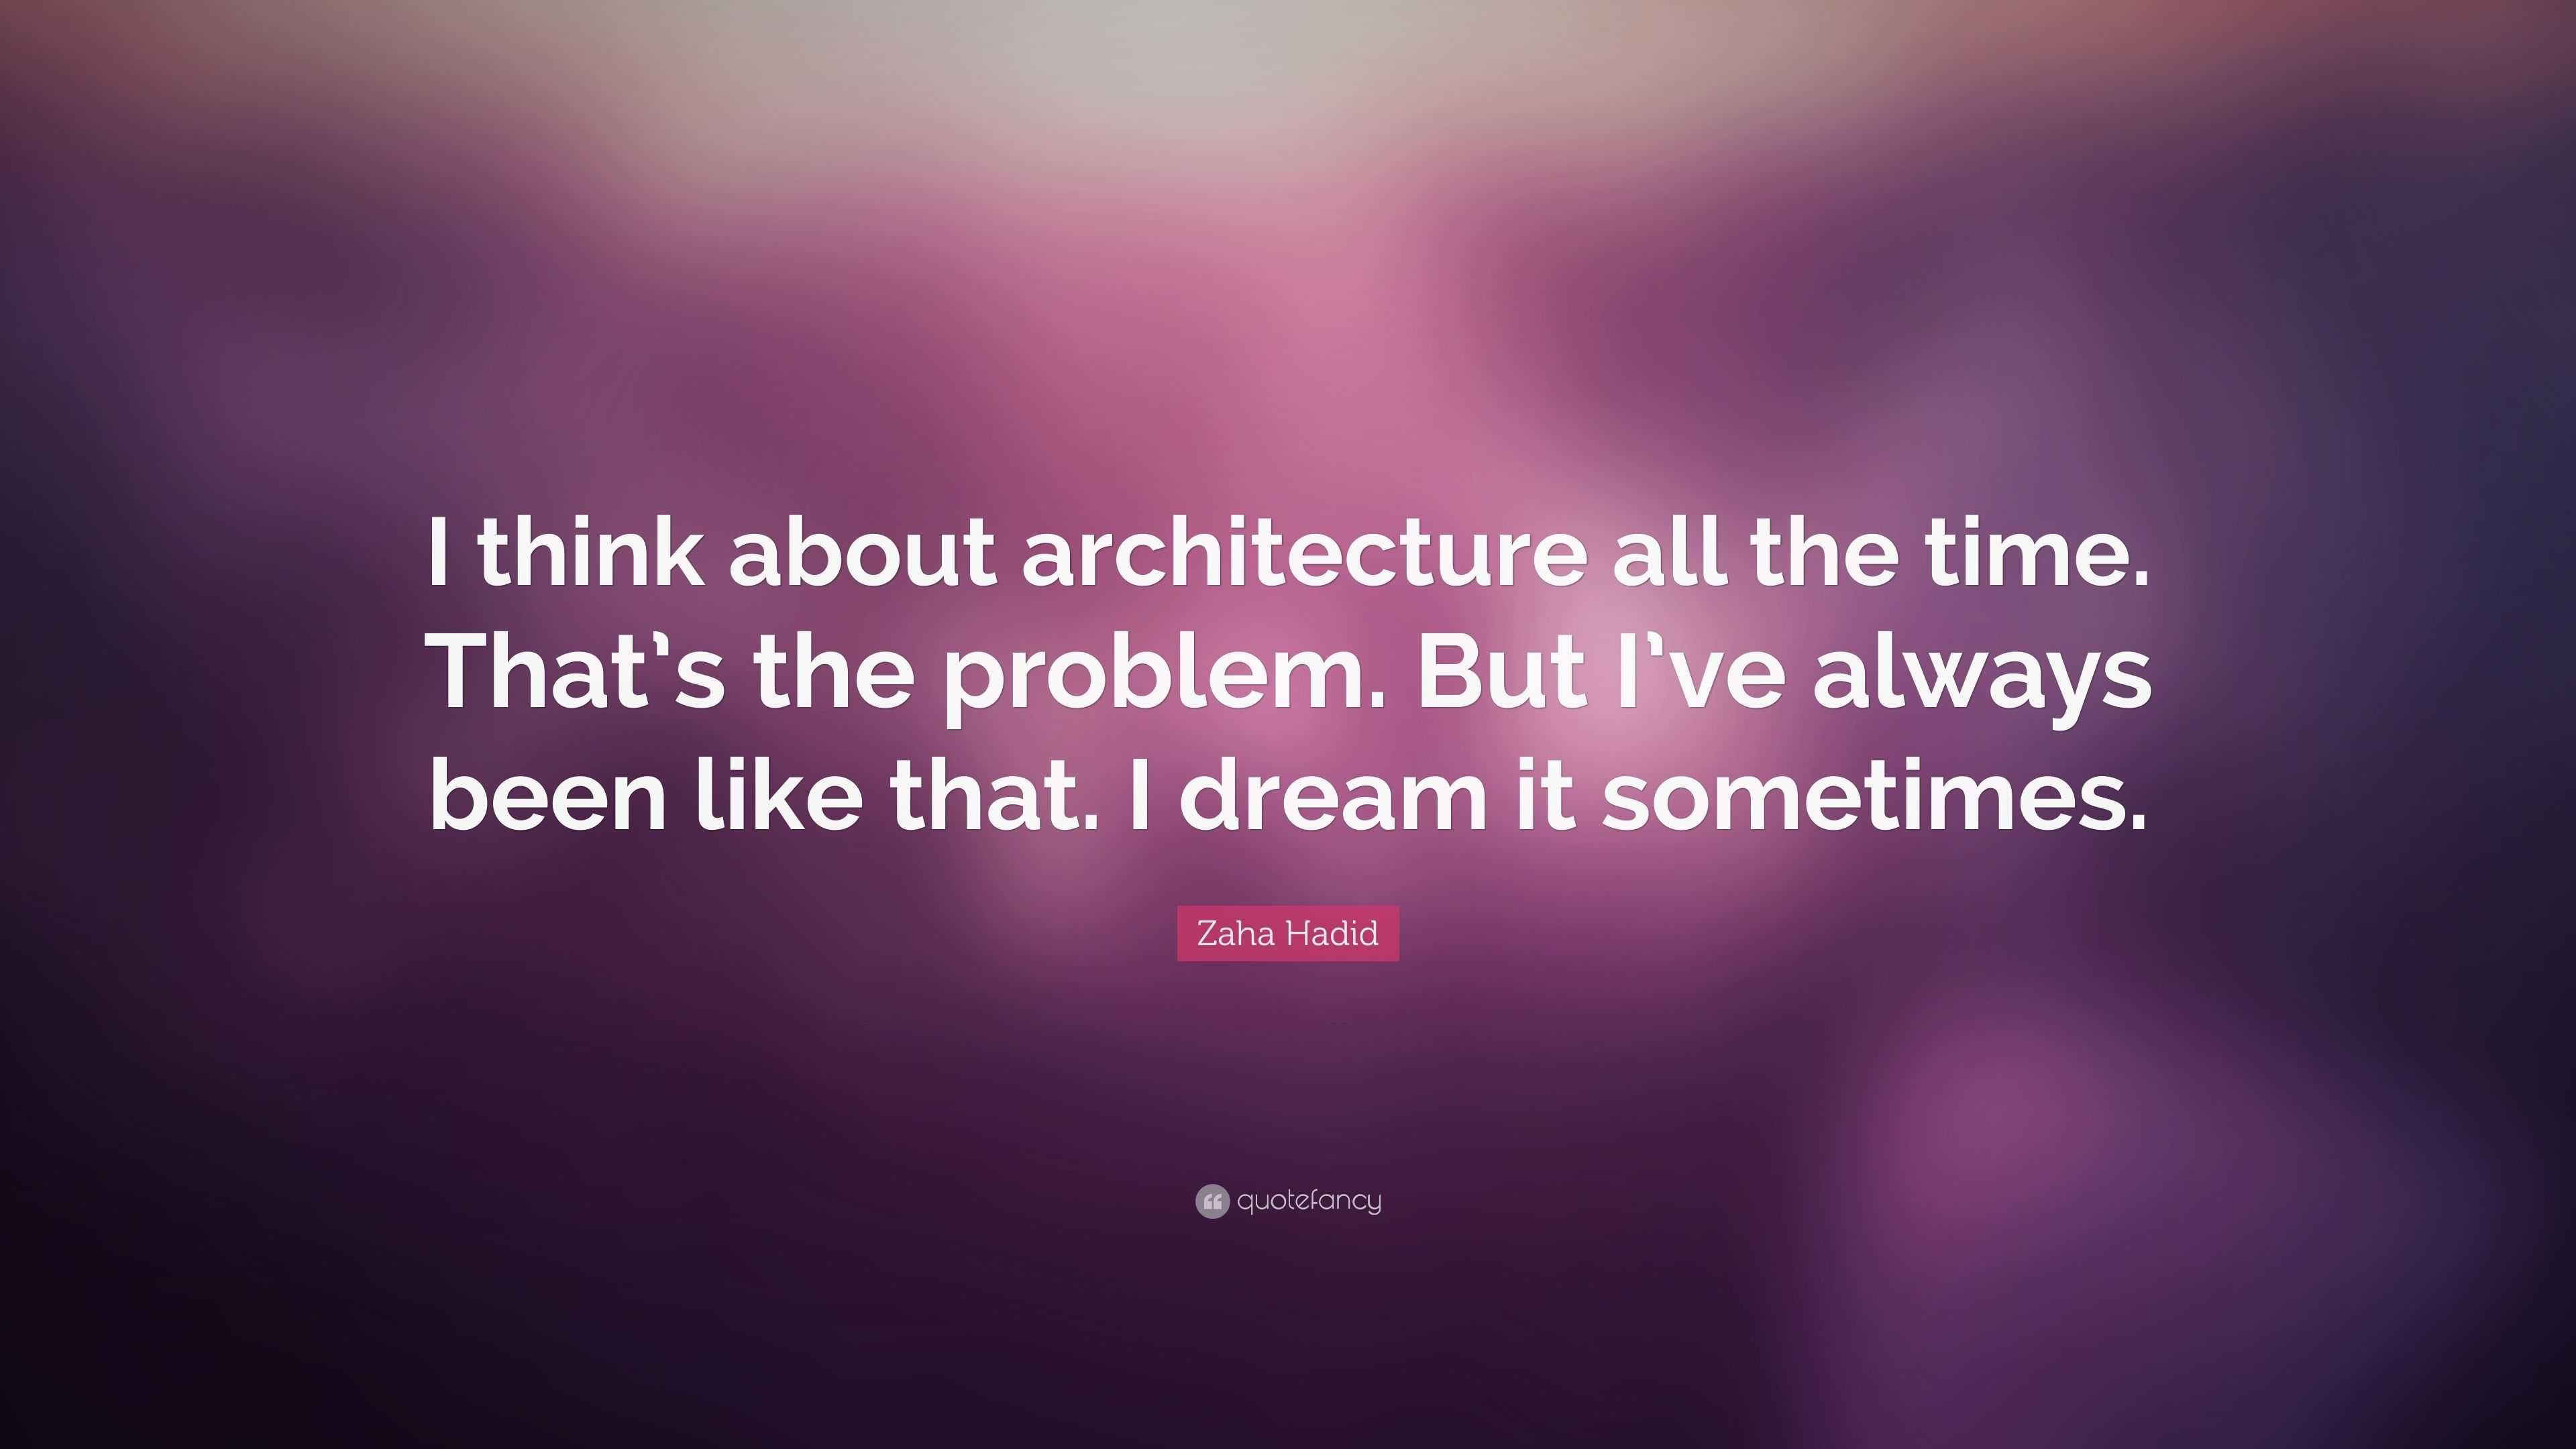 Zaha Hadid Quote: “I think about architecture all the time. That’s the ...